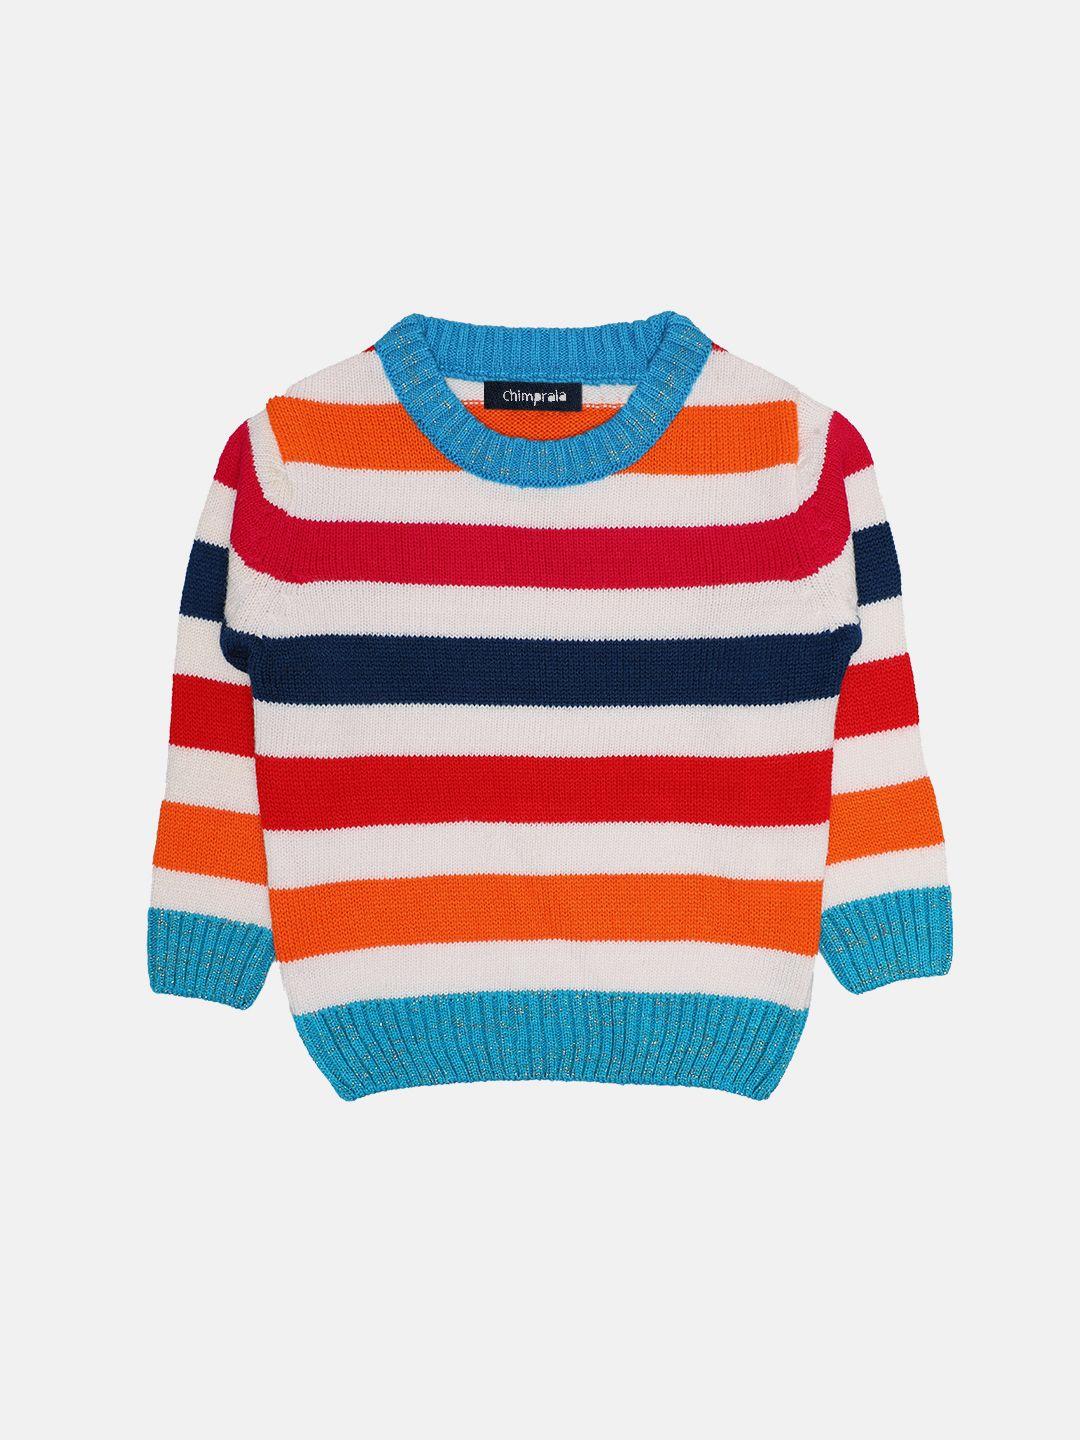 chimprala boys white & red striped woolen pullover